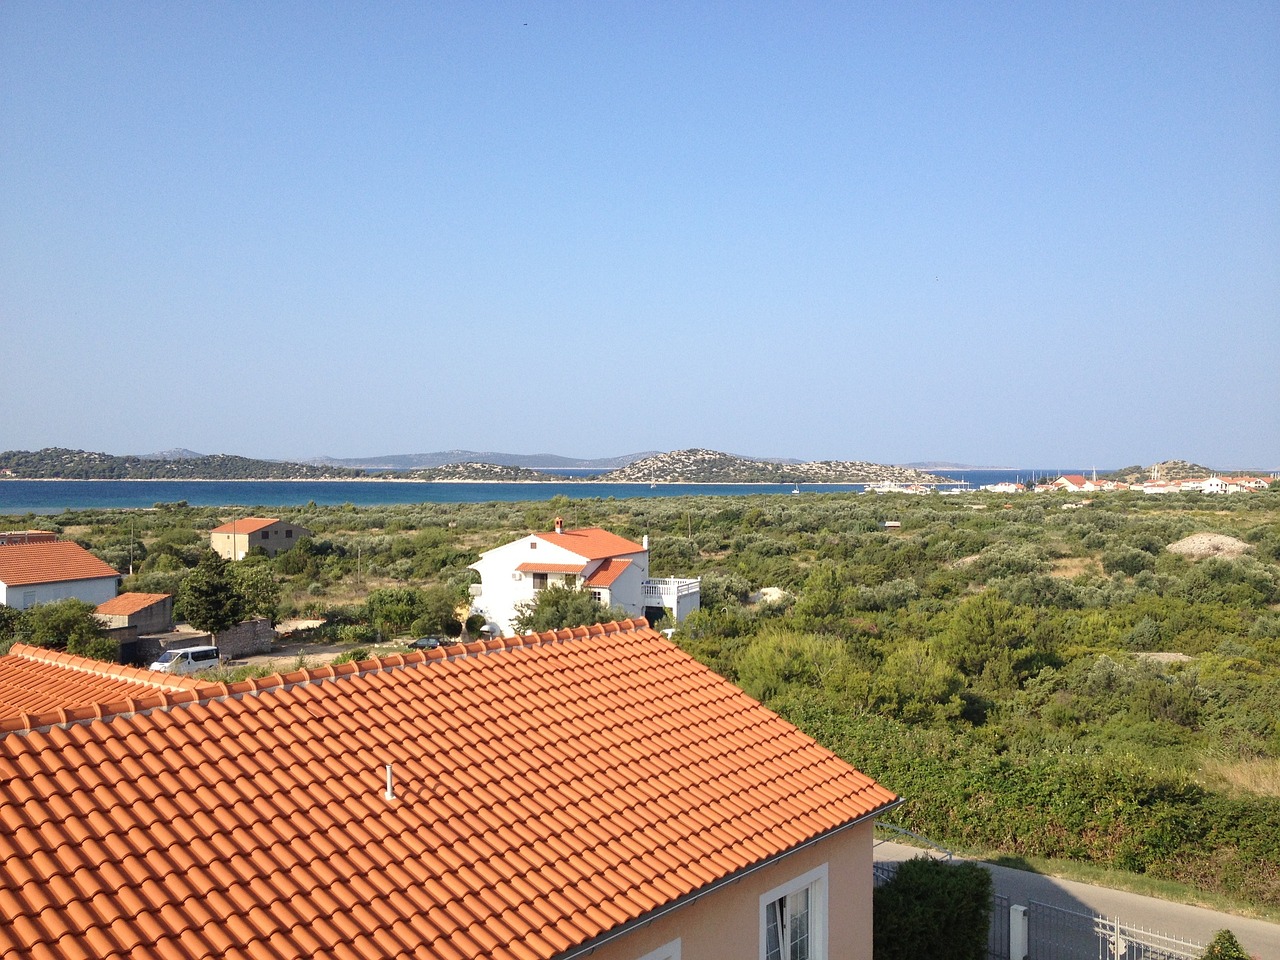 3 Days of Beach and History in Vodice